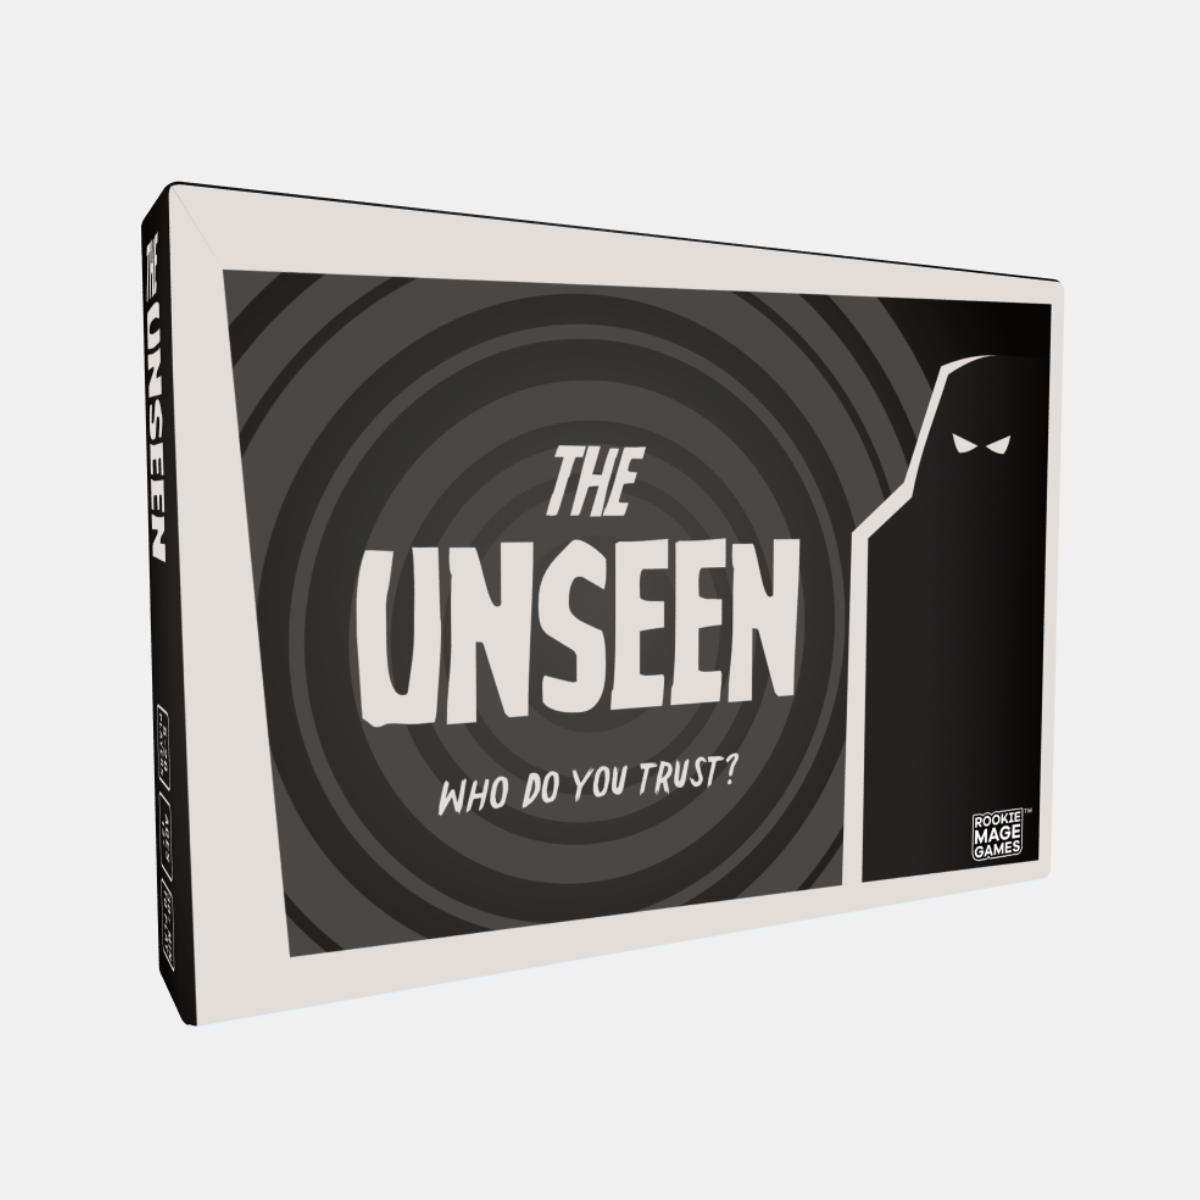 THE UNSEEN - An Adult Party Game of Secret Identities